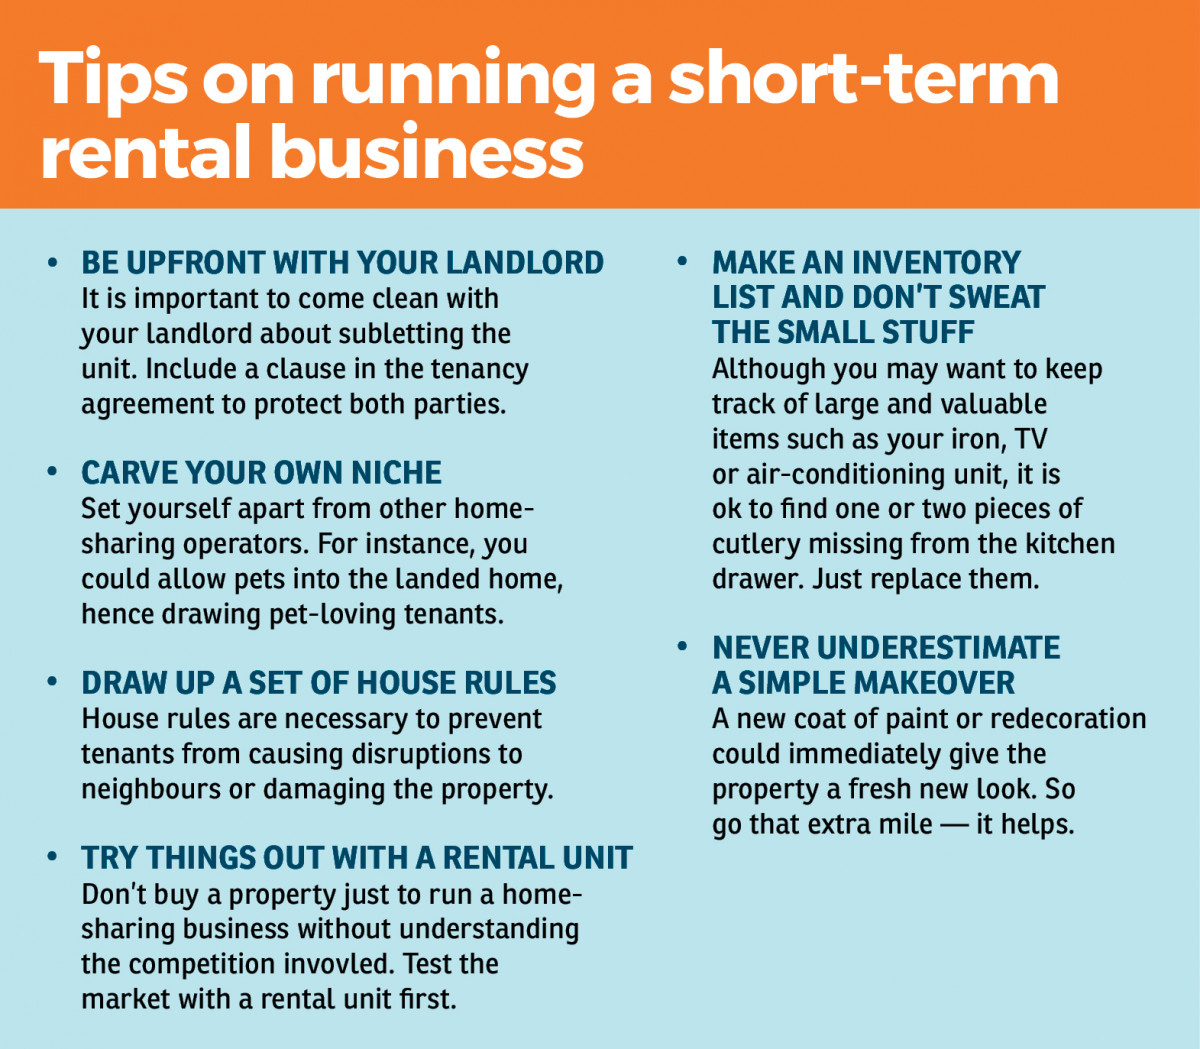  Sold On Short Term Rentals: How to Buy, Launch and